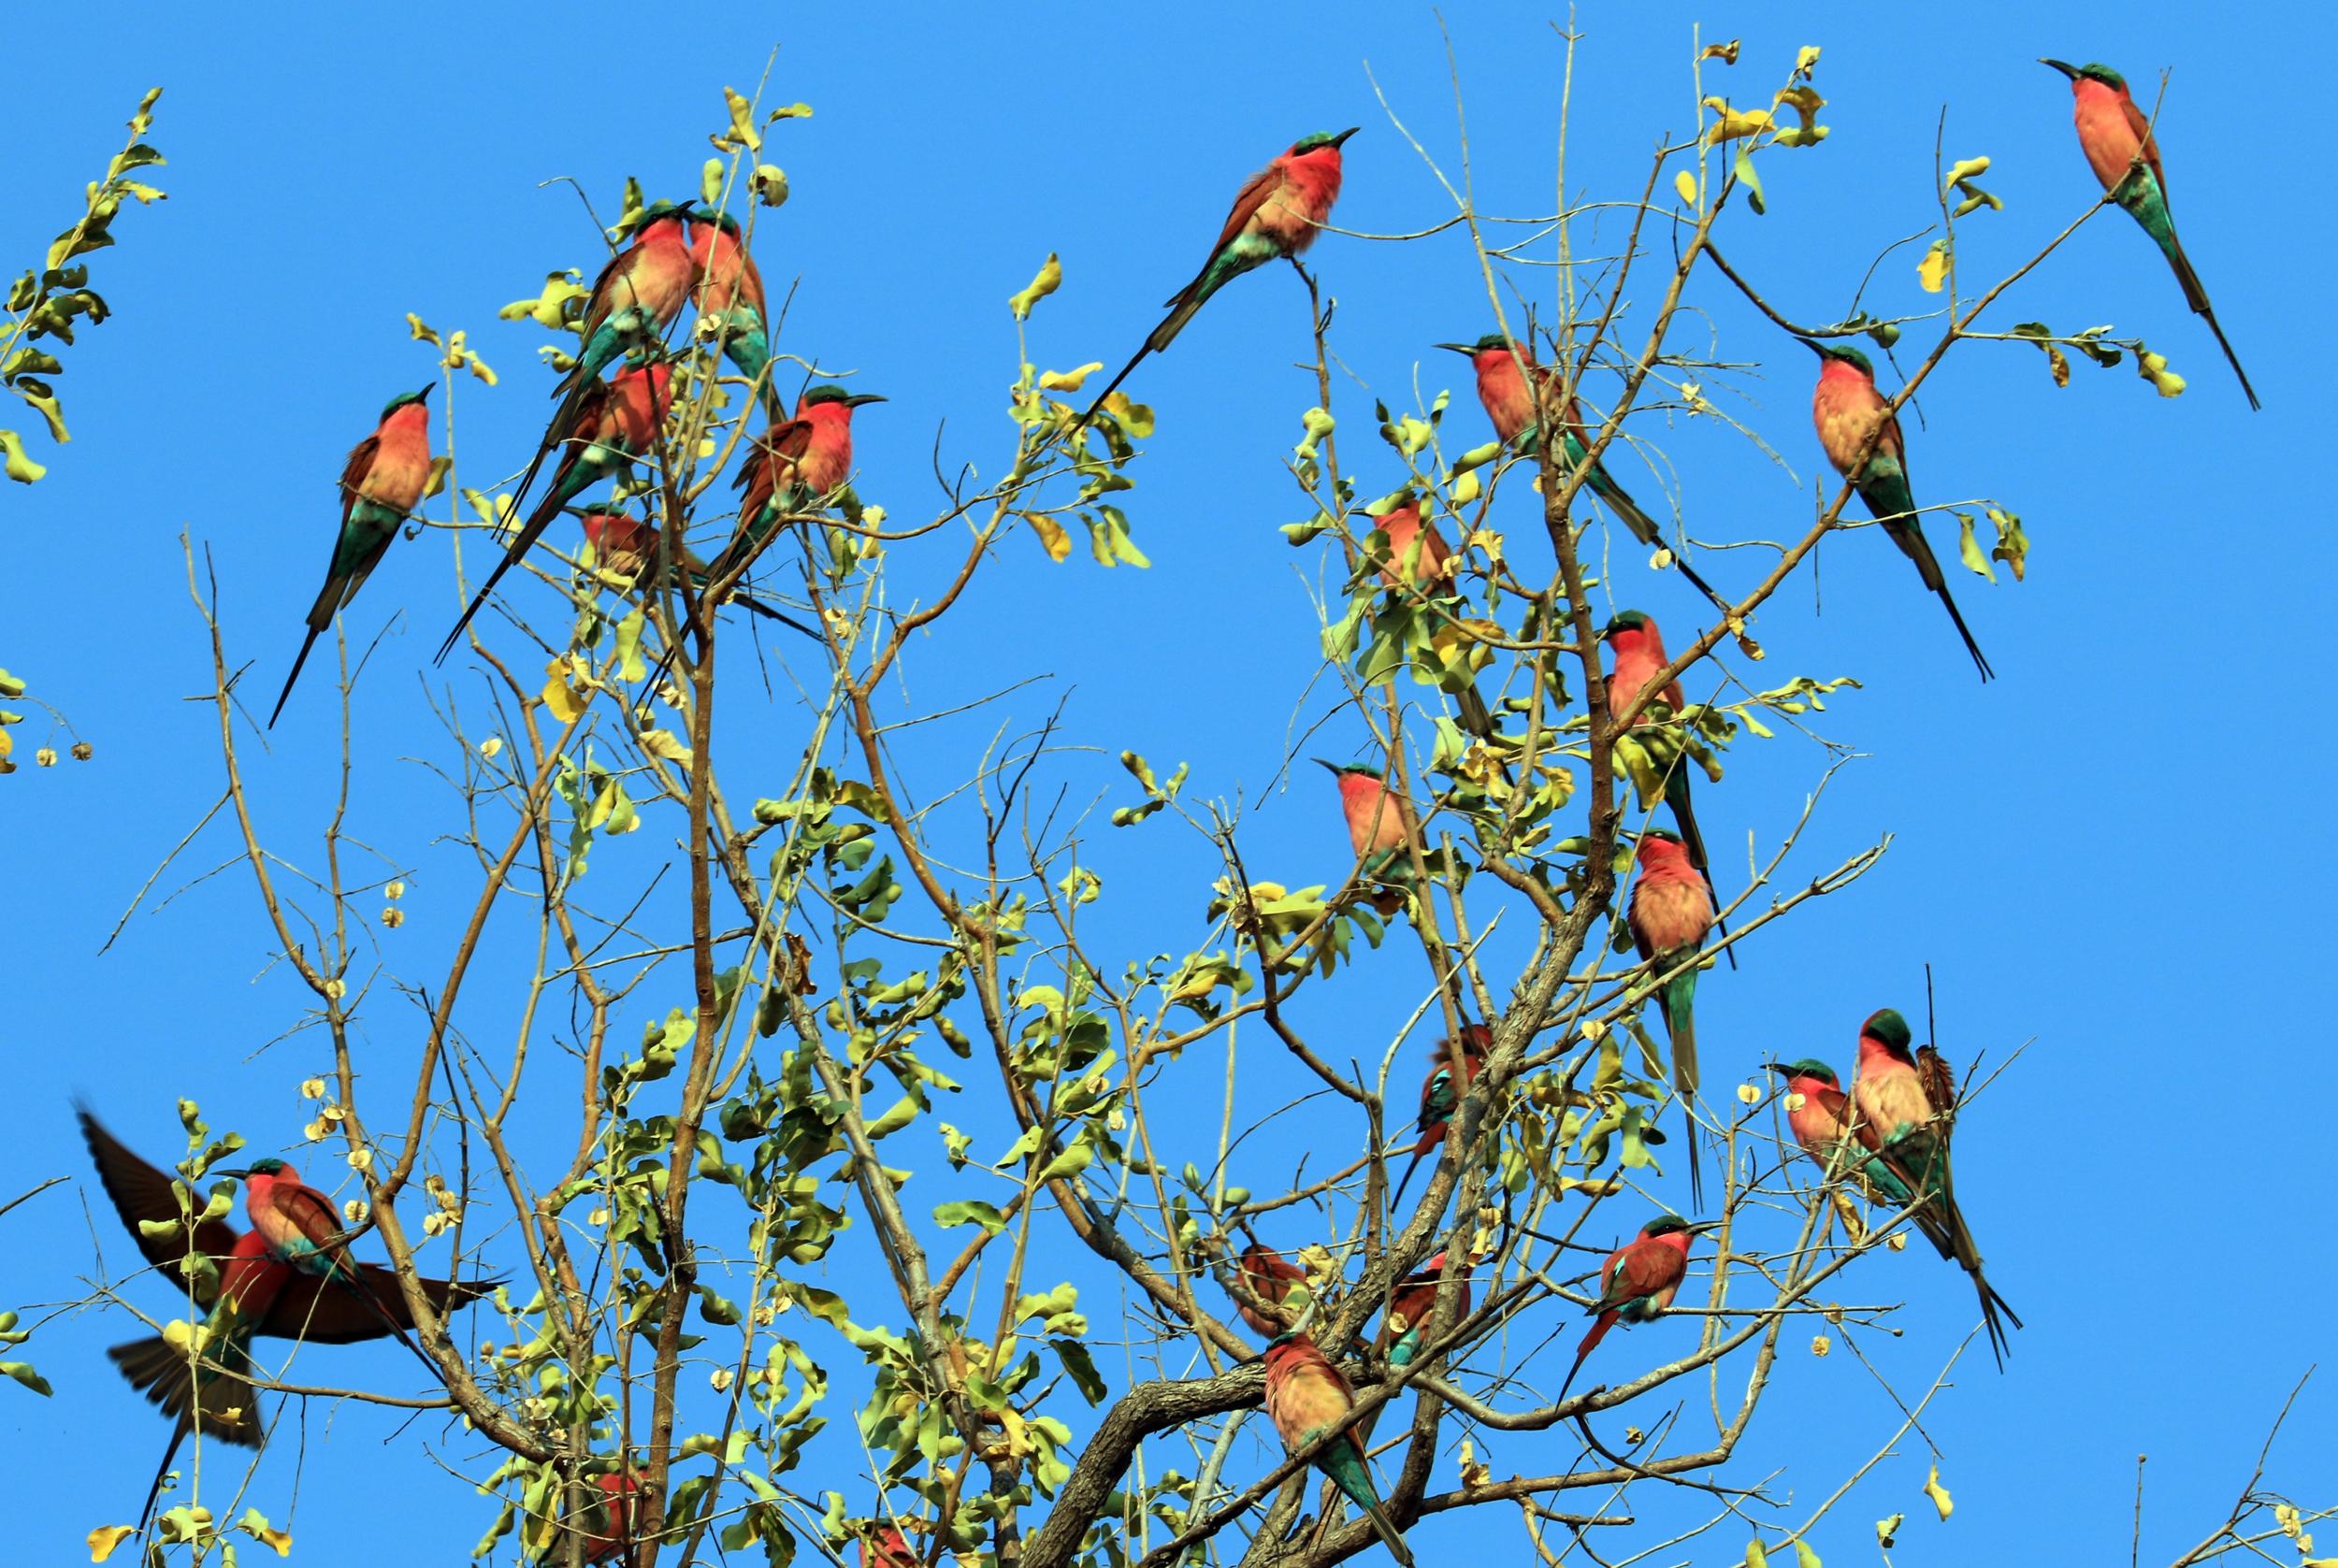 Carmine bee-eaters stand out because of their bright plumage...